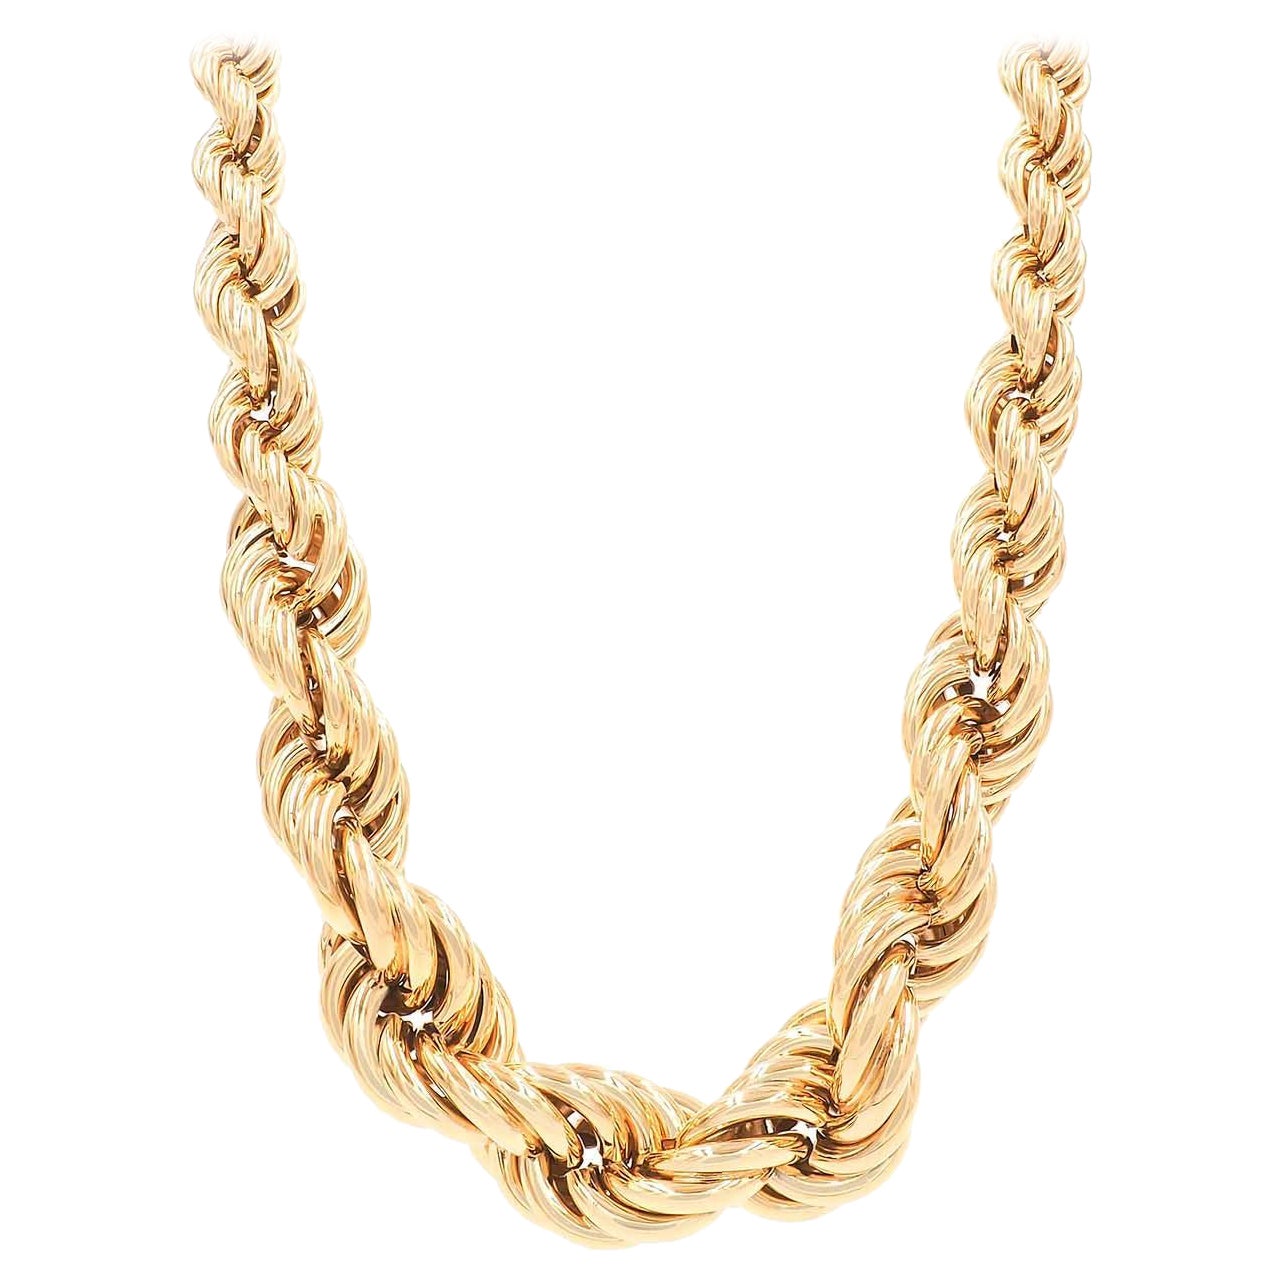 Vintage 18 Karat Gold Graduated Twisted Rope Link Chain Necklace For Sale